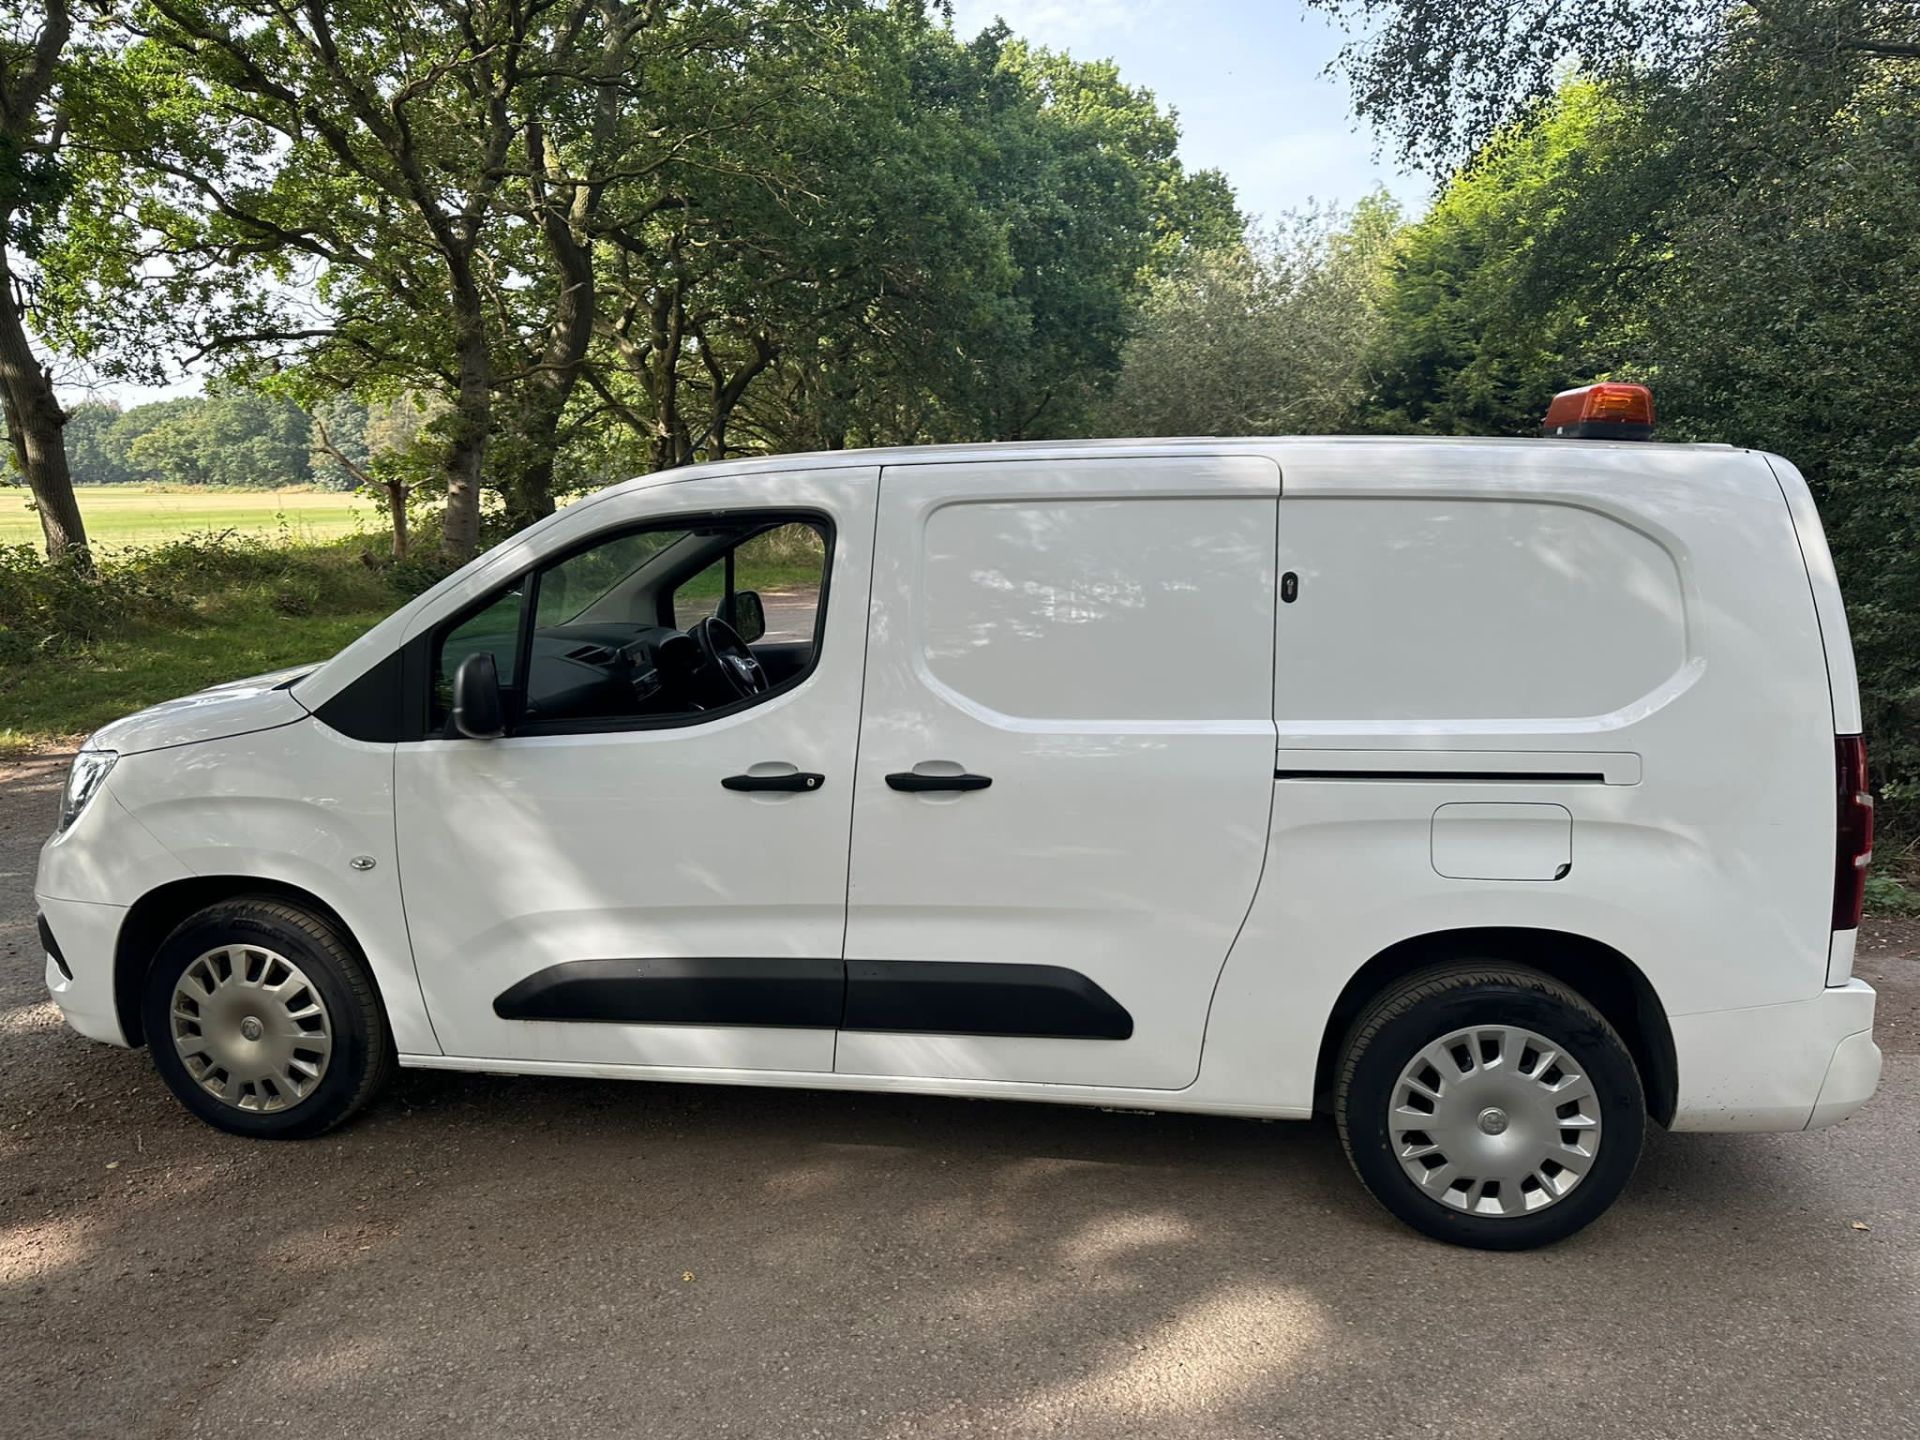 2020 20 Vauxhall combo sportive Panel van - 73k miles - Euro 6 - Lwb - Air con - ply lined - Image 4 of 10